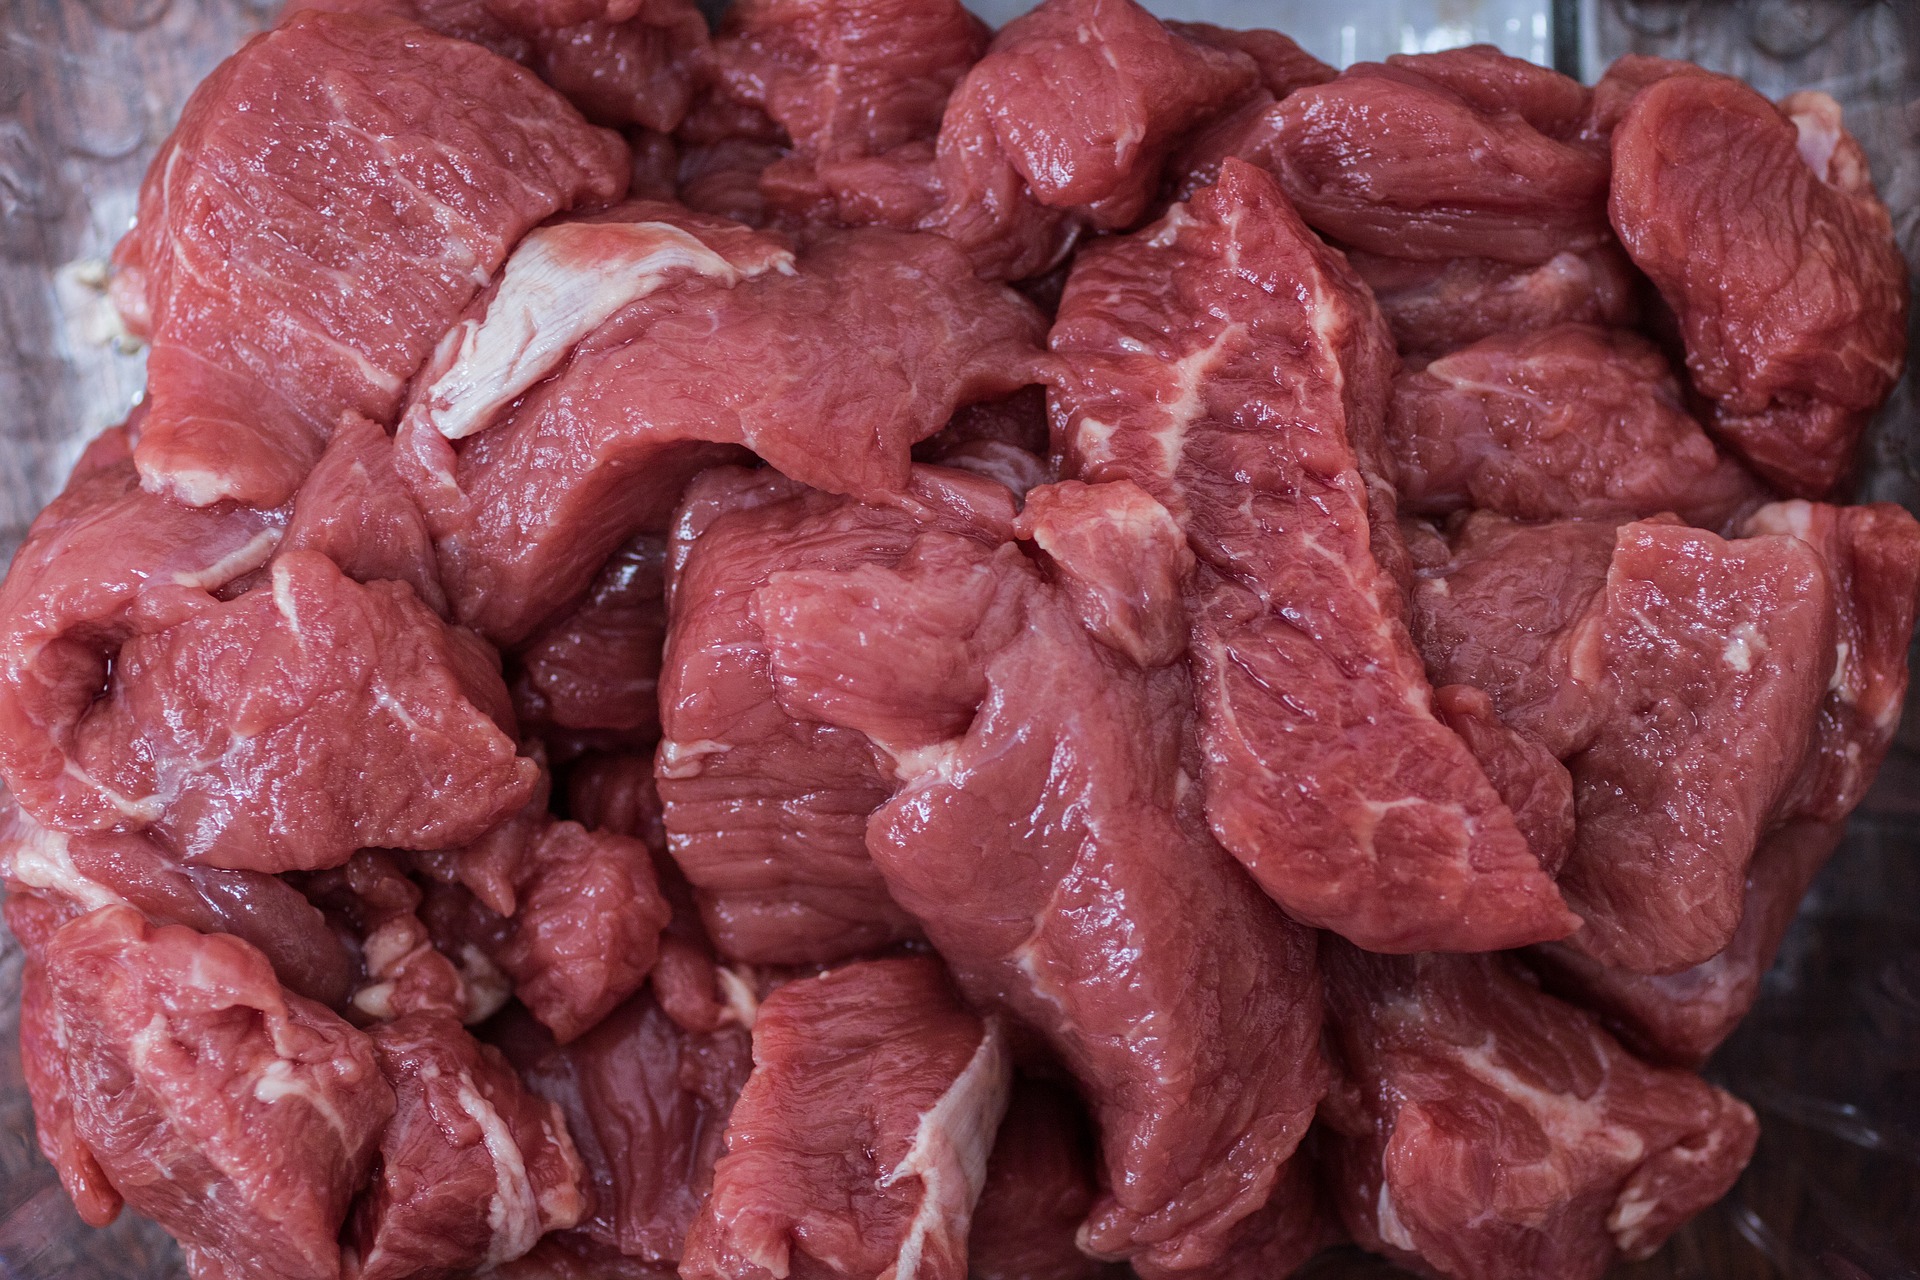 Red meat in a file image.